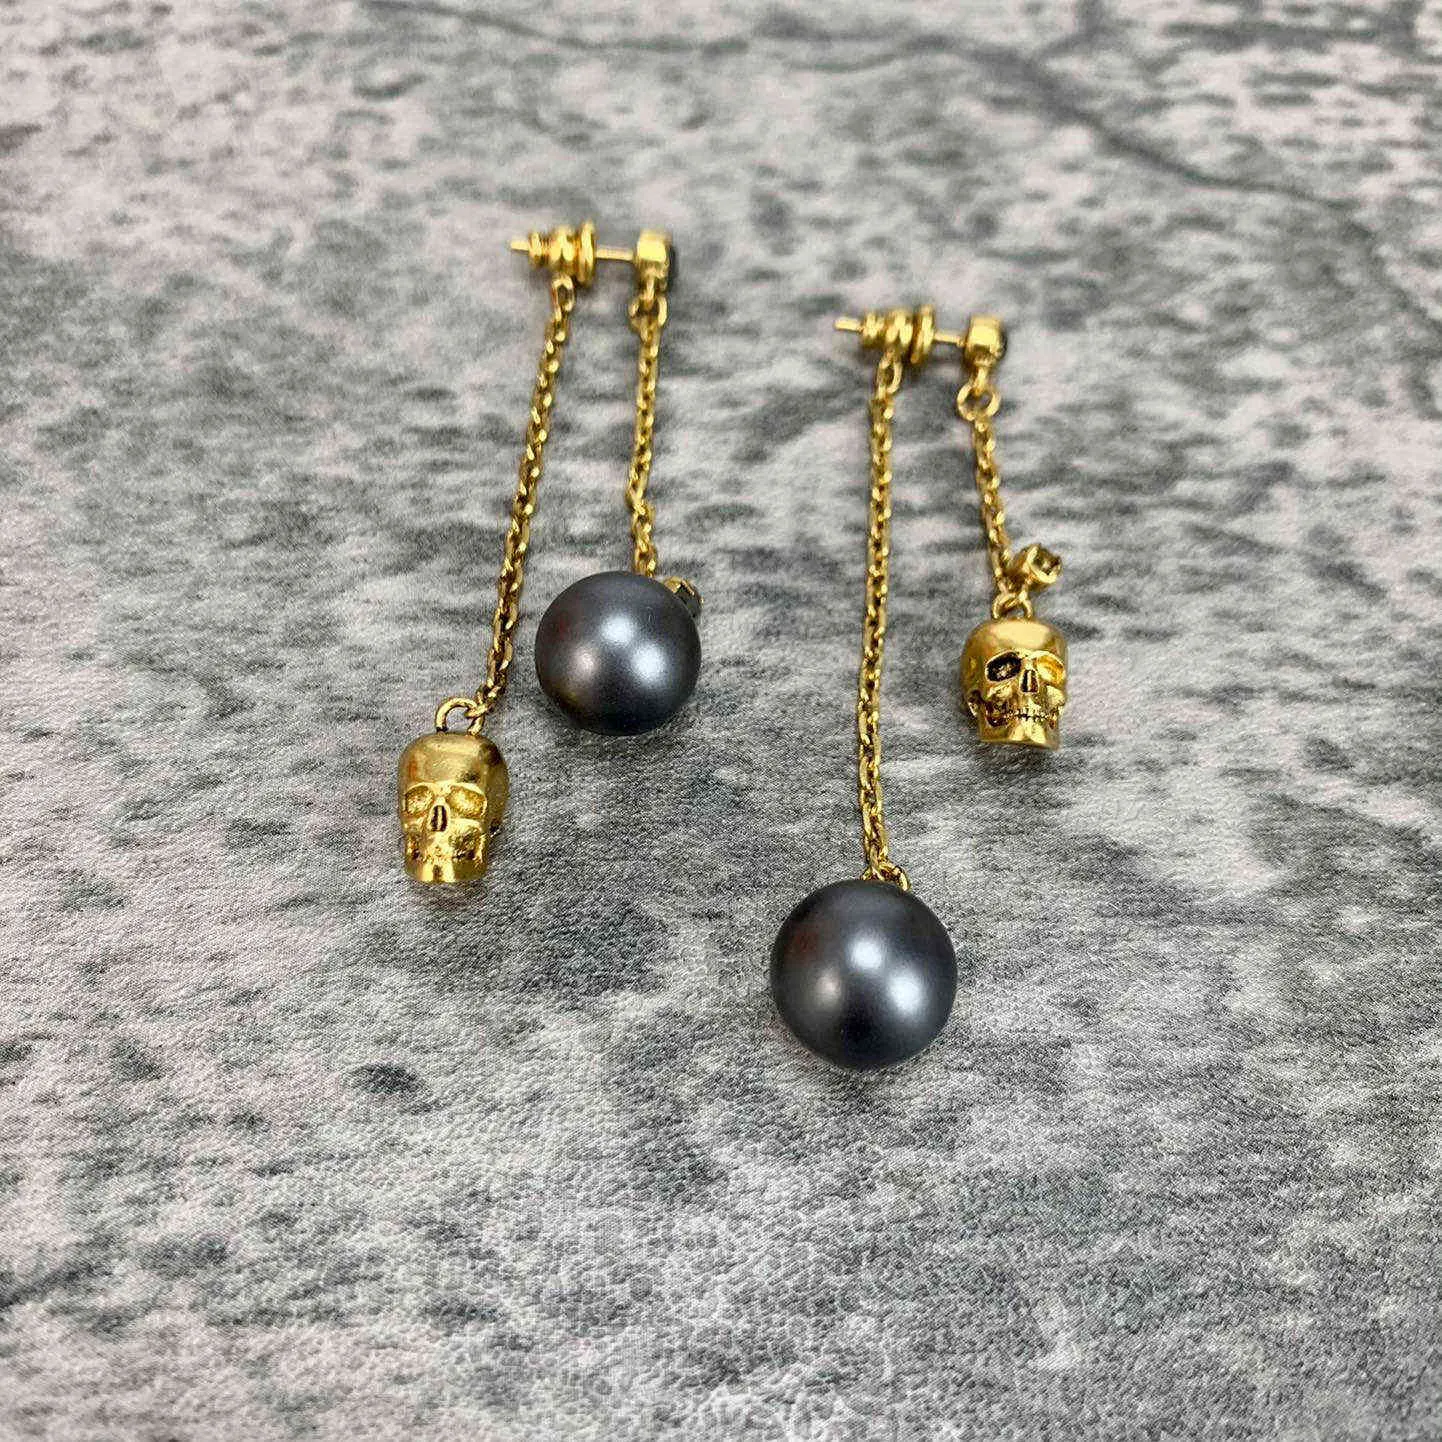 Brand Yellow Gold Color Fashion Jewelry Woman Black Pearls Earrings Skull Head Party High Quality Chain Pearls Stud Earrings9601013